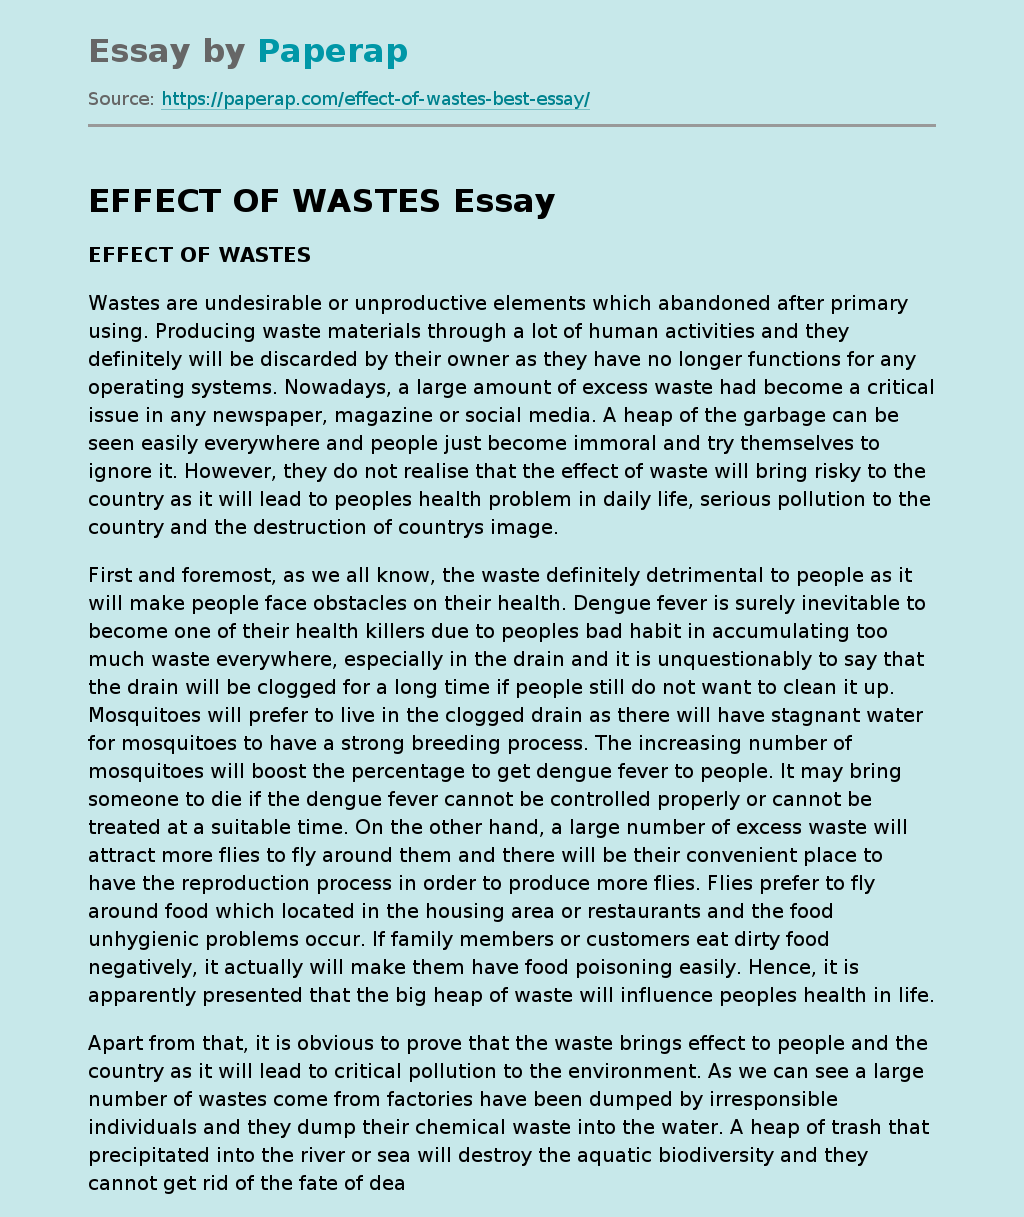 EFFECT OF WASTES